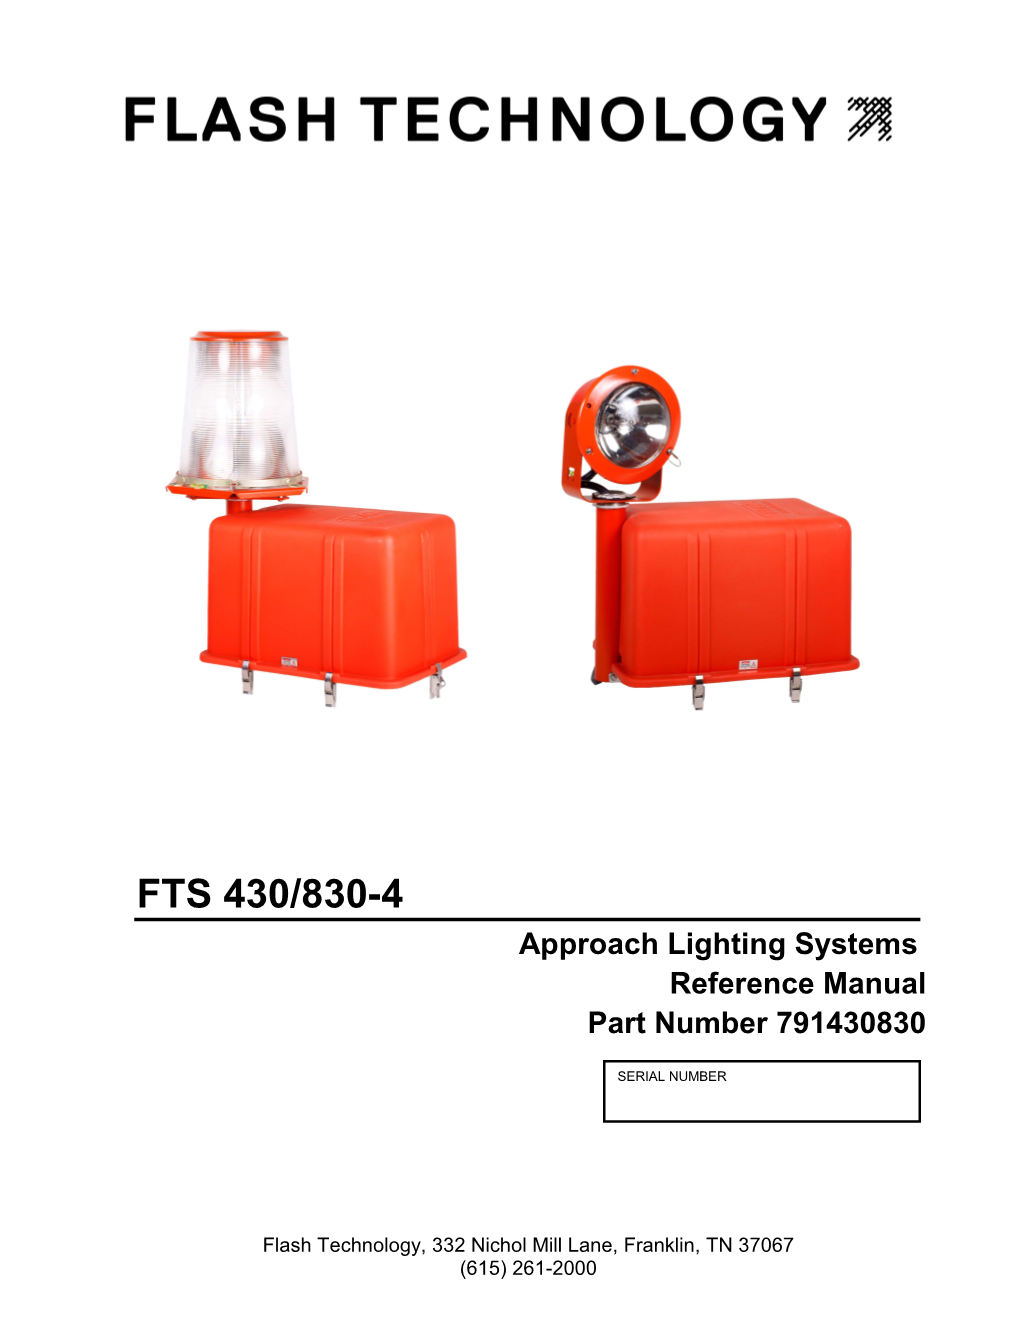 FTS 430/830-4 Approach Lighting Systems Reference Manual Part Number 791430830